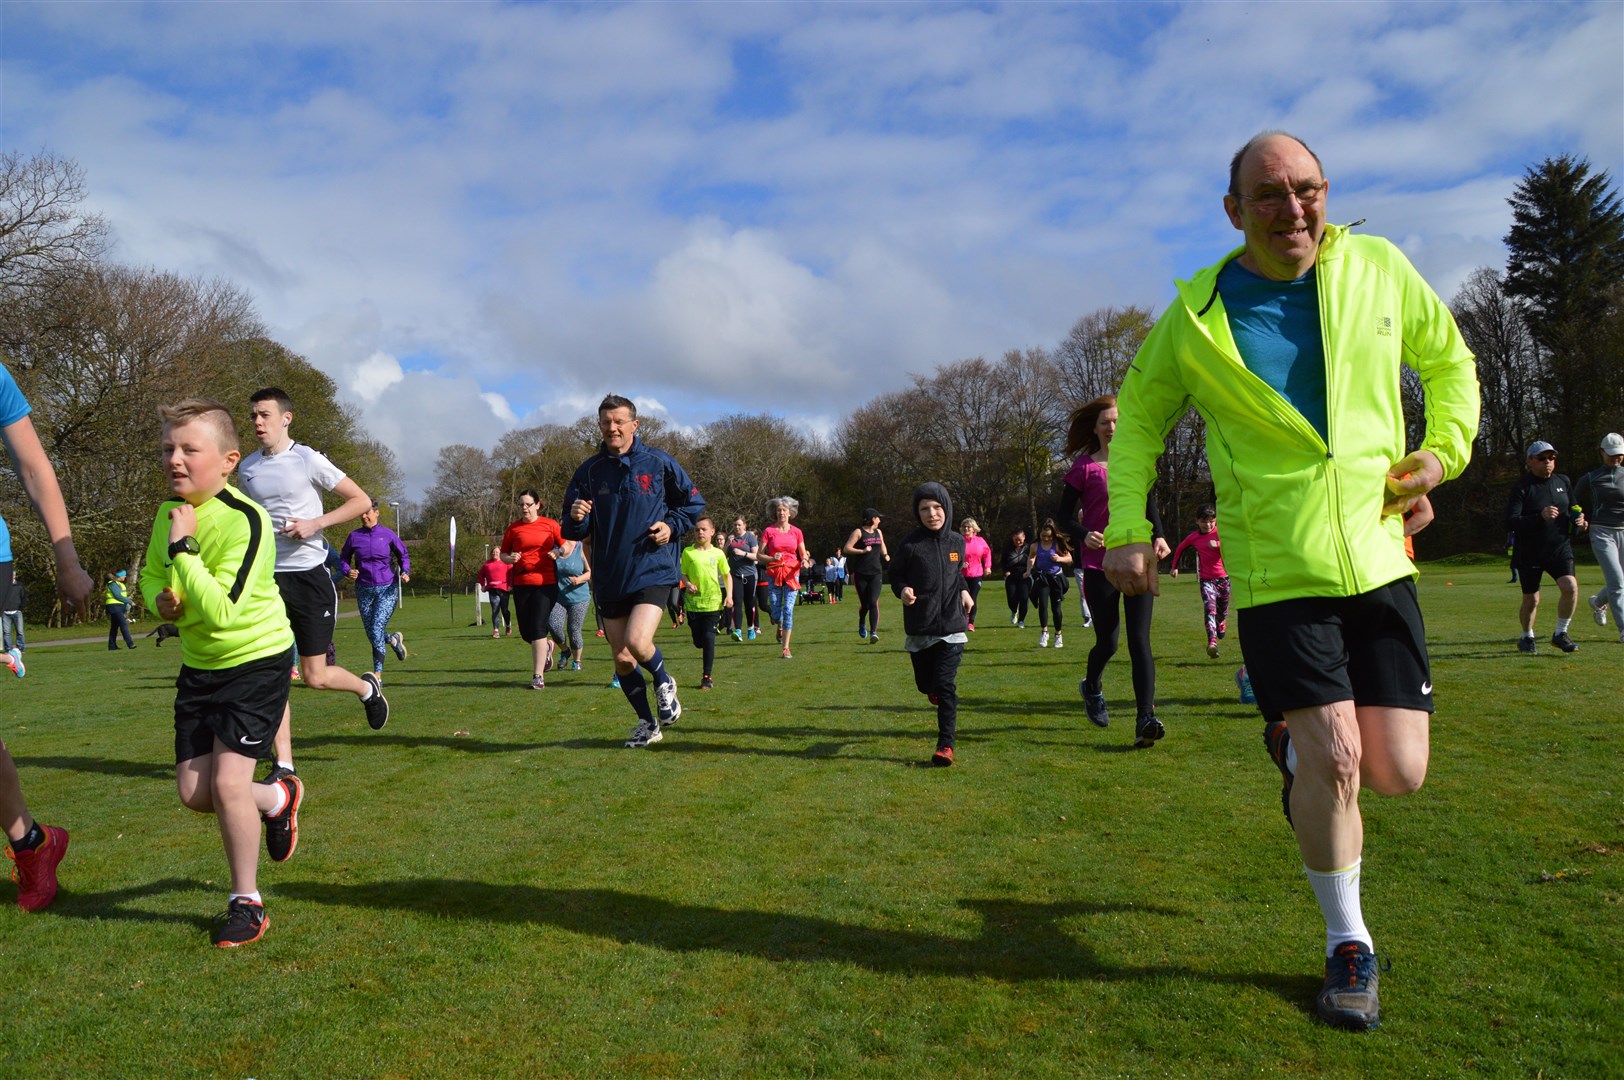 Alness Parkrun has become an established Saturday morning routine for many people in the area.